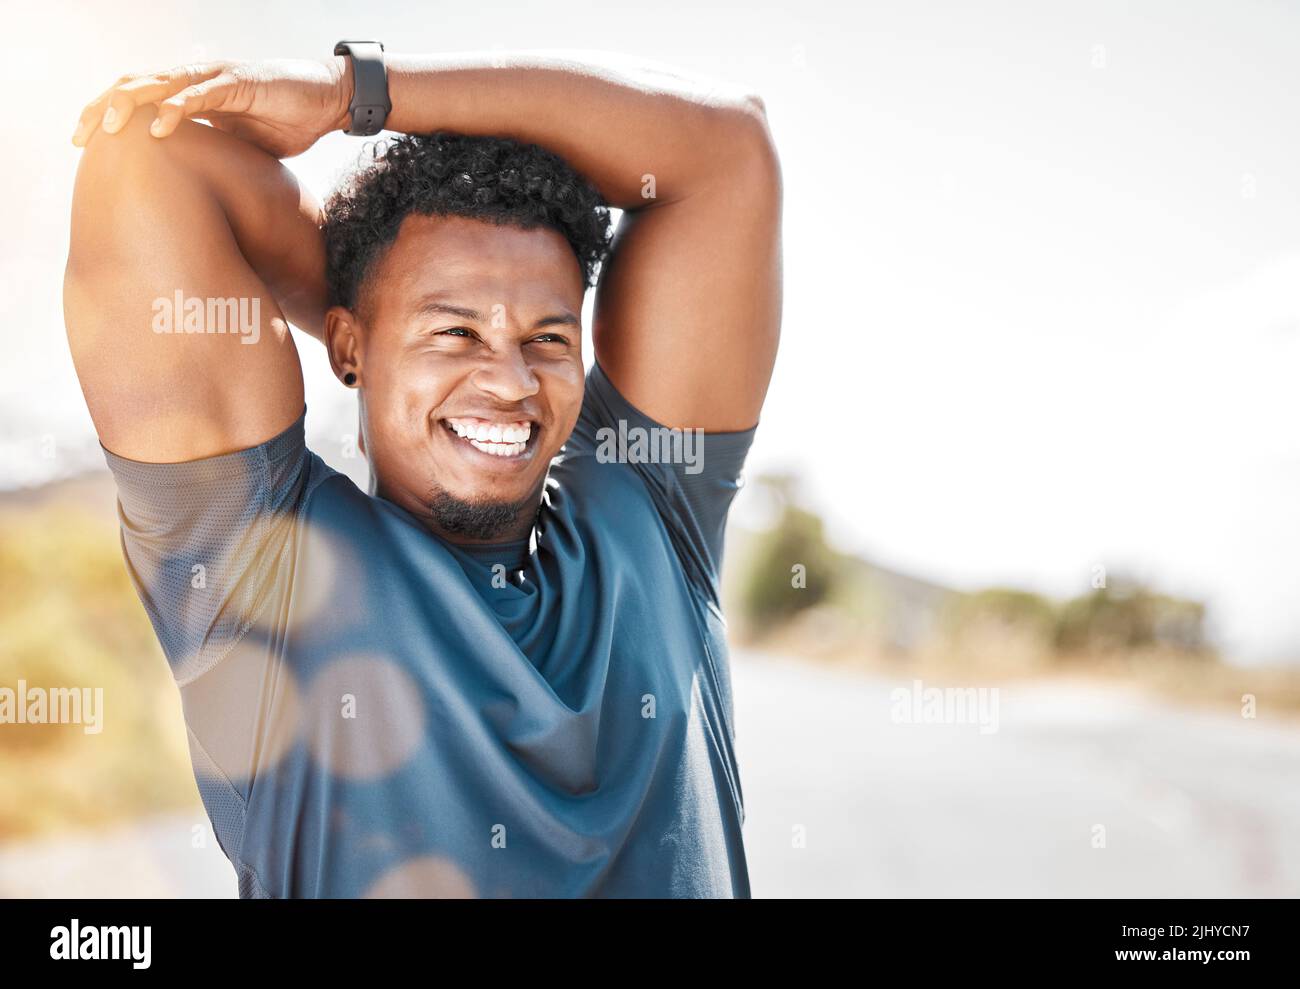 Exercise is labor without weariness. a sporty young man stretching before a run outdoors. Stock Photo